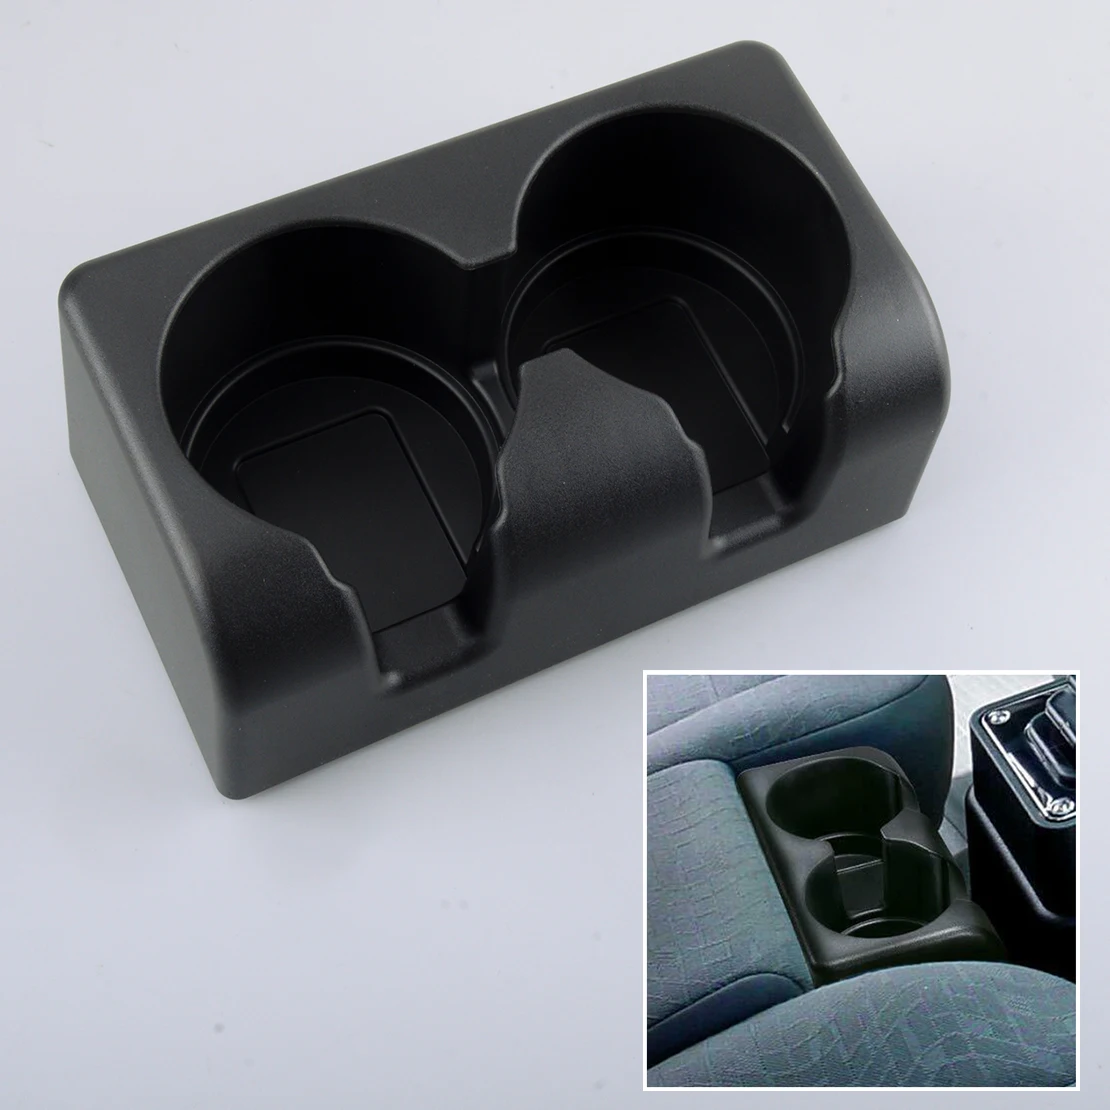 

Bench Console Seat Cup Holder Insert Drink 89039574 Fit for GMC Canyon Chevrolet Colorado 89039575 2004 2005 2006 2007 2008-2012